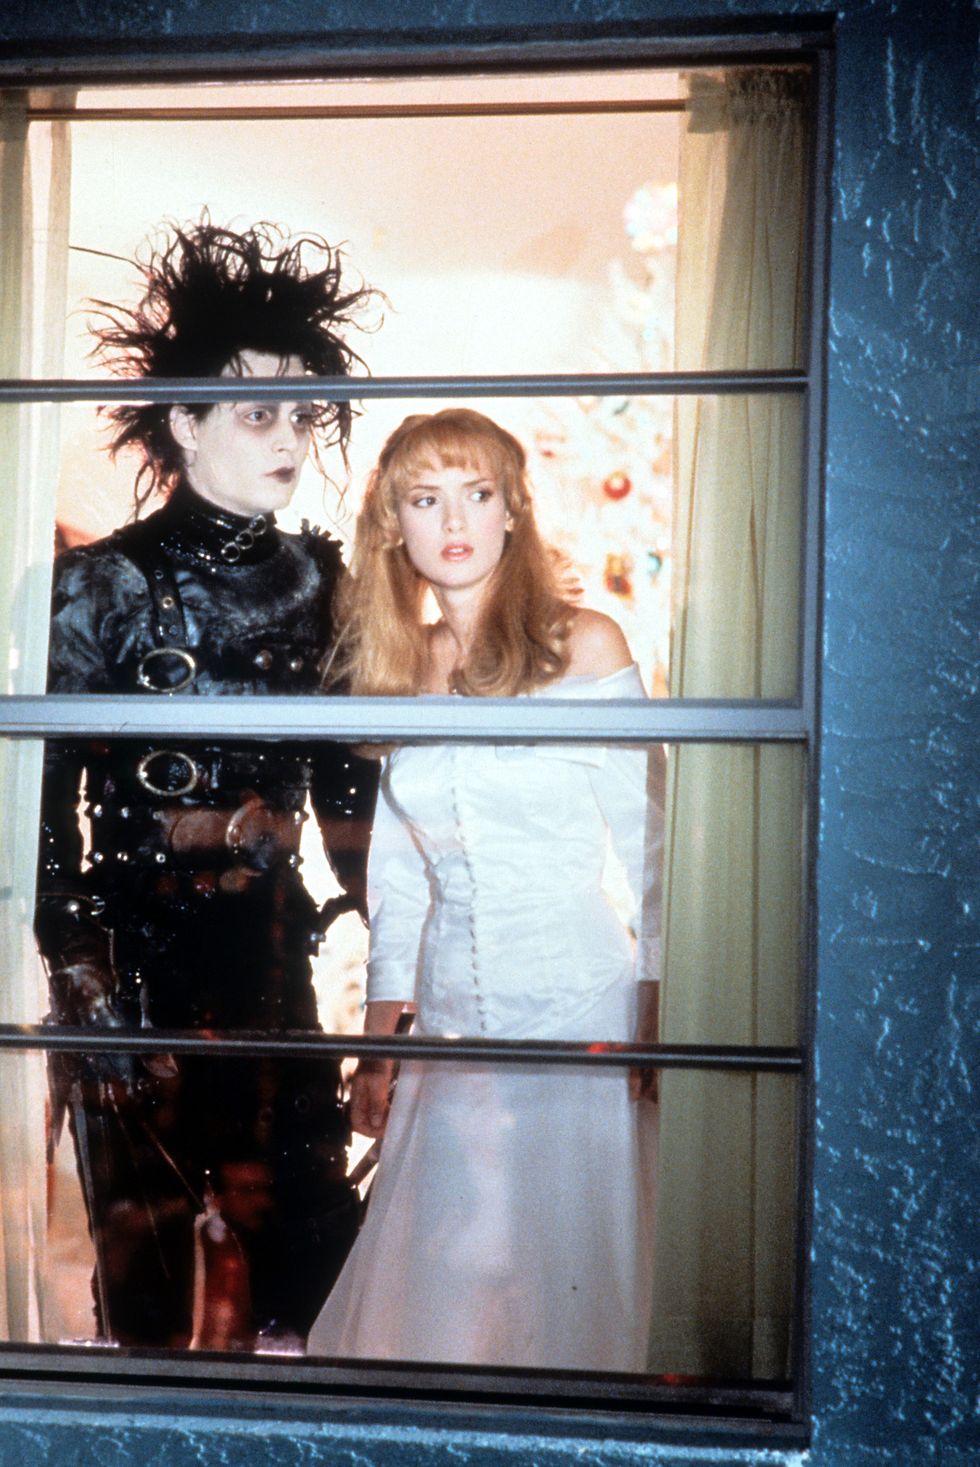 johnny depp and winona ryder looking out window in a scene from the film edward scissorhands, 1990 photo by 20th century foxgetty images